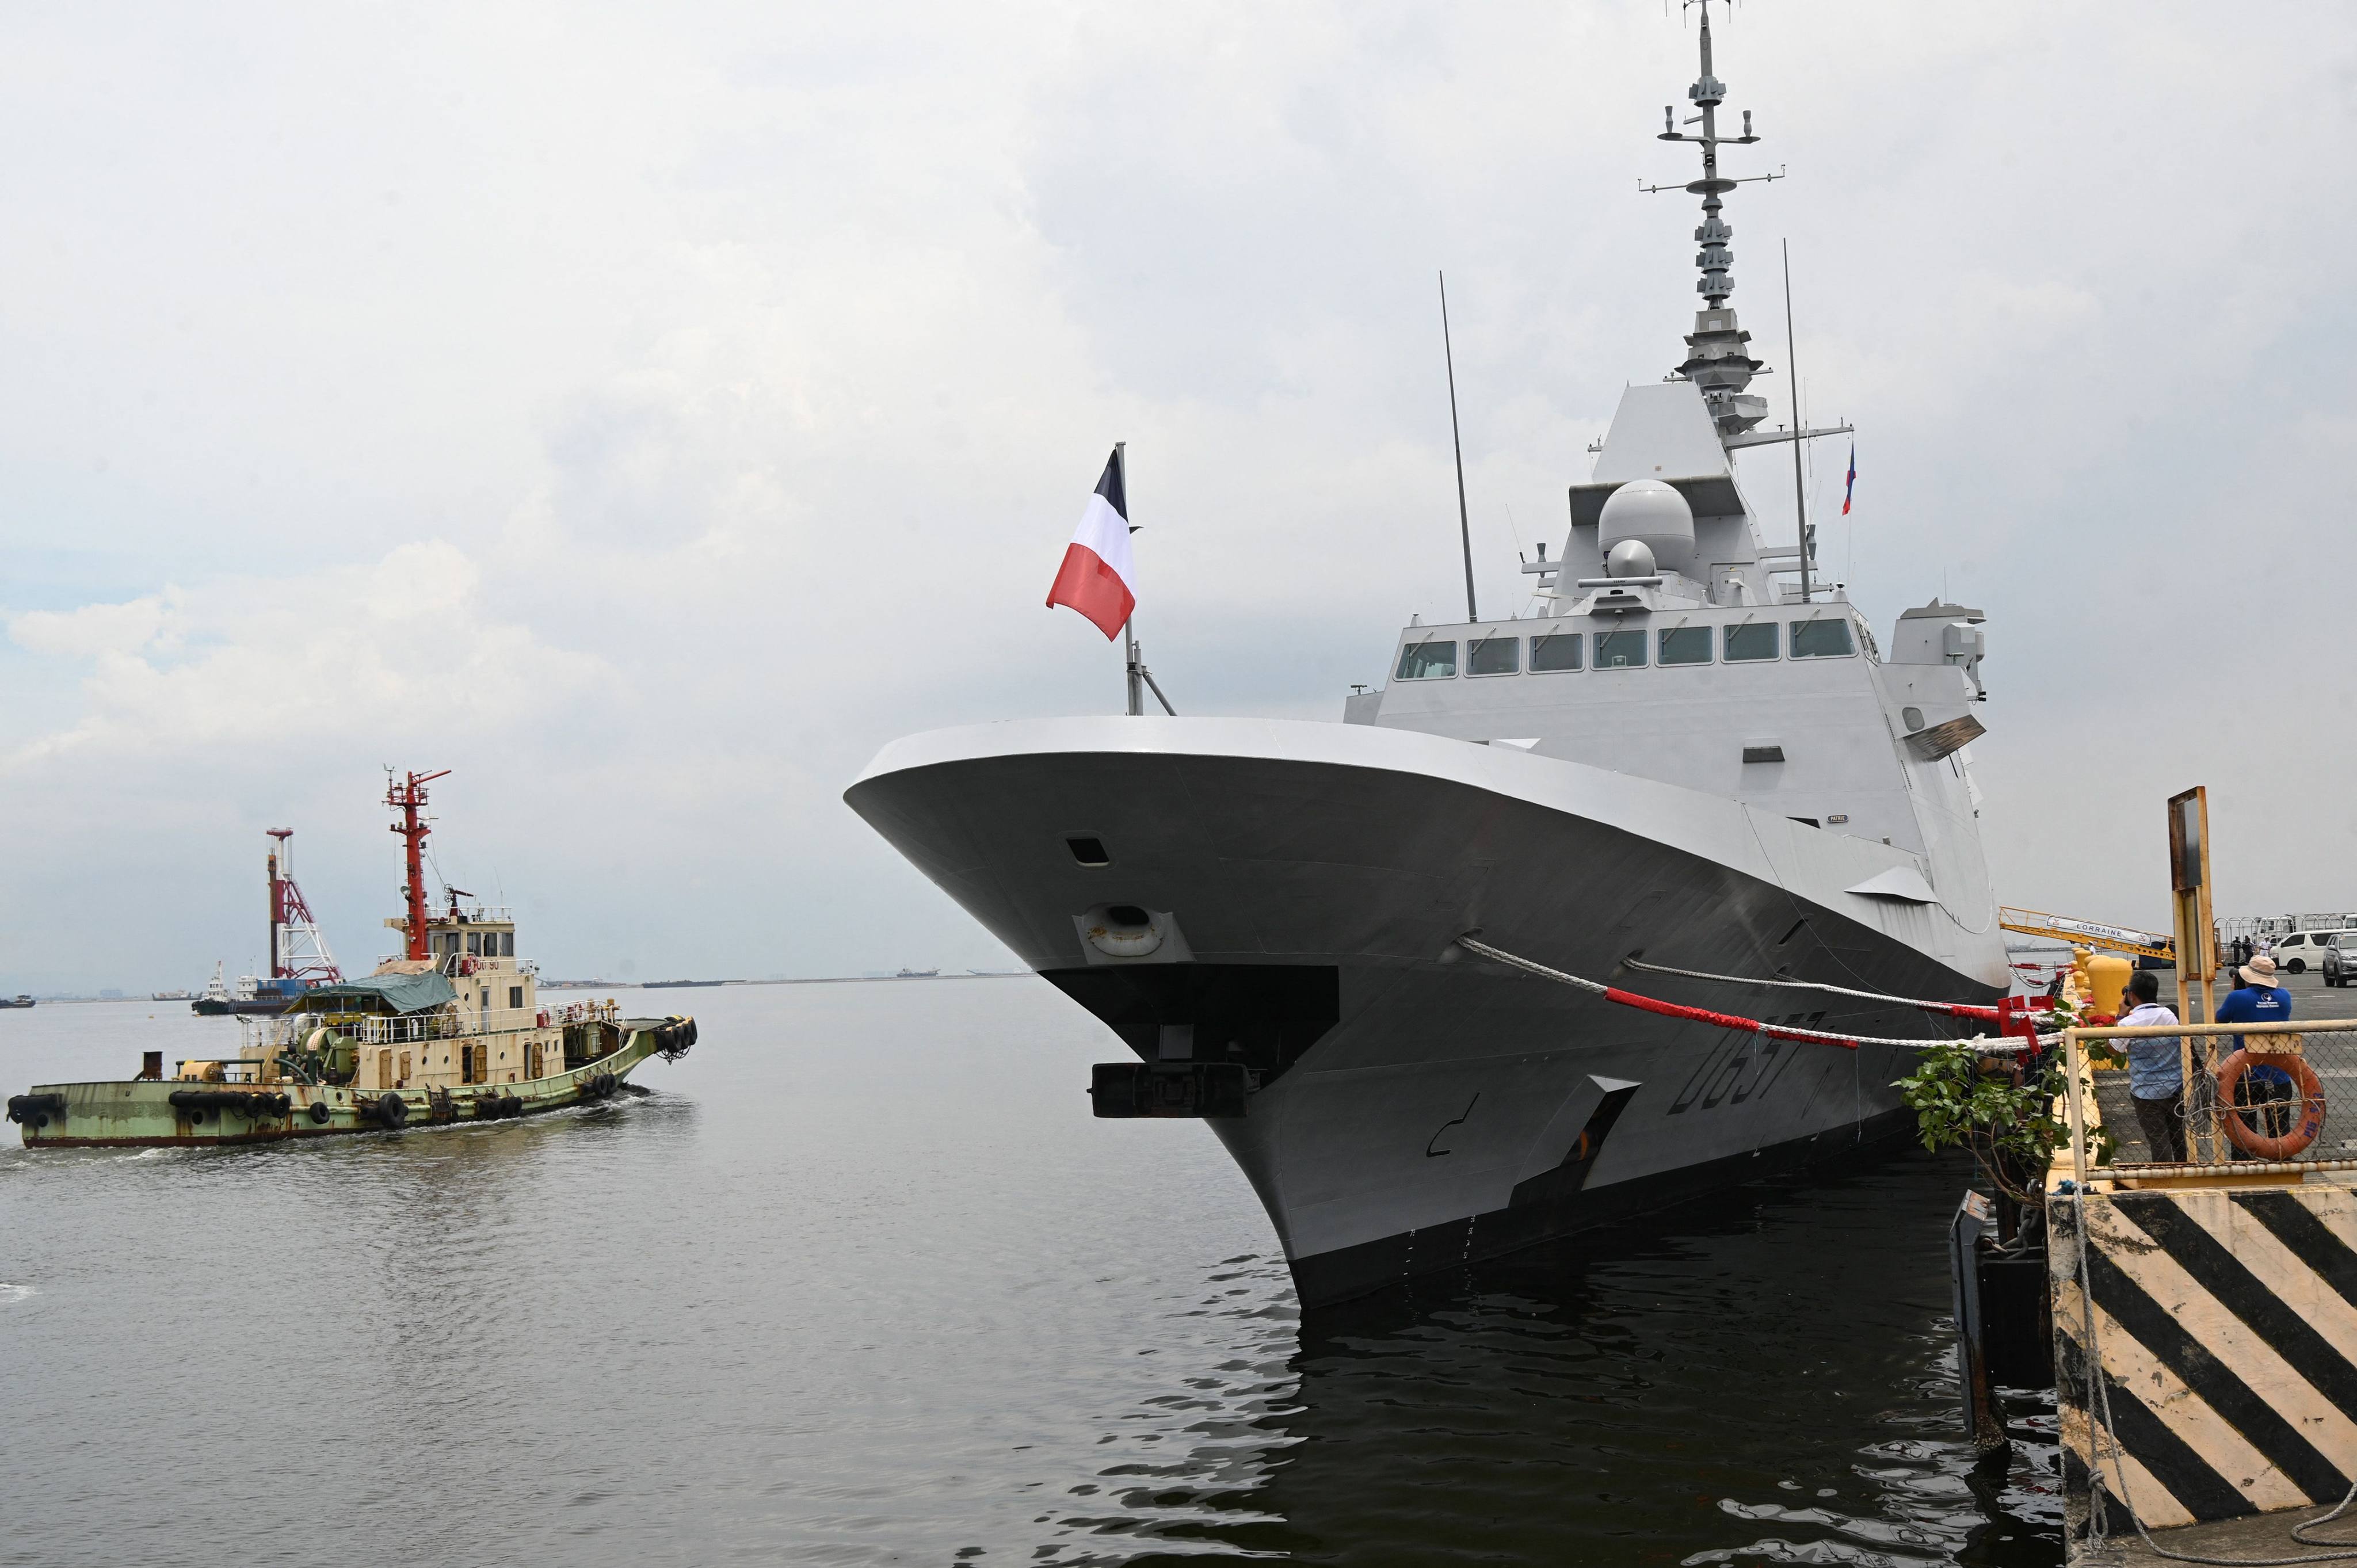 The French navy destroyer Lorraine is docked at Manila’s port on June 28. The Lorraine was in the Philippines for a port call after leaving Japan, part of an extended deployment to Asia. Photo: AFP